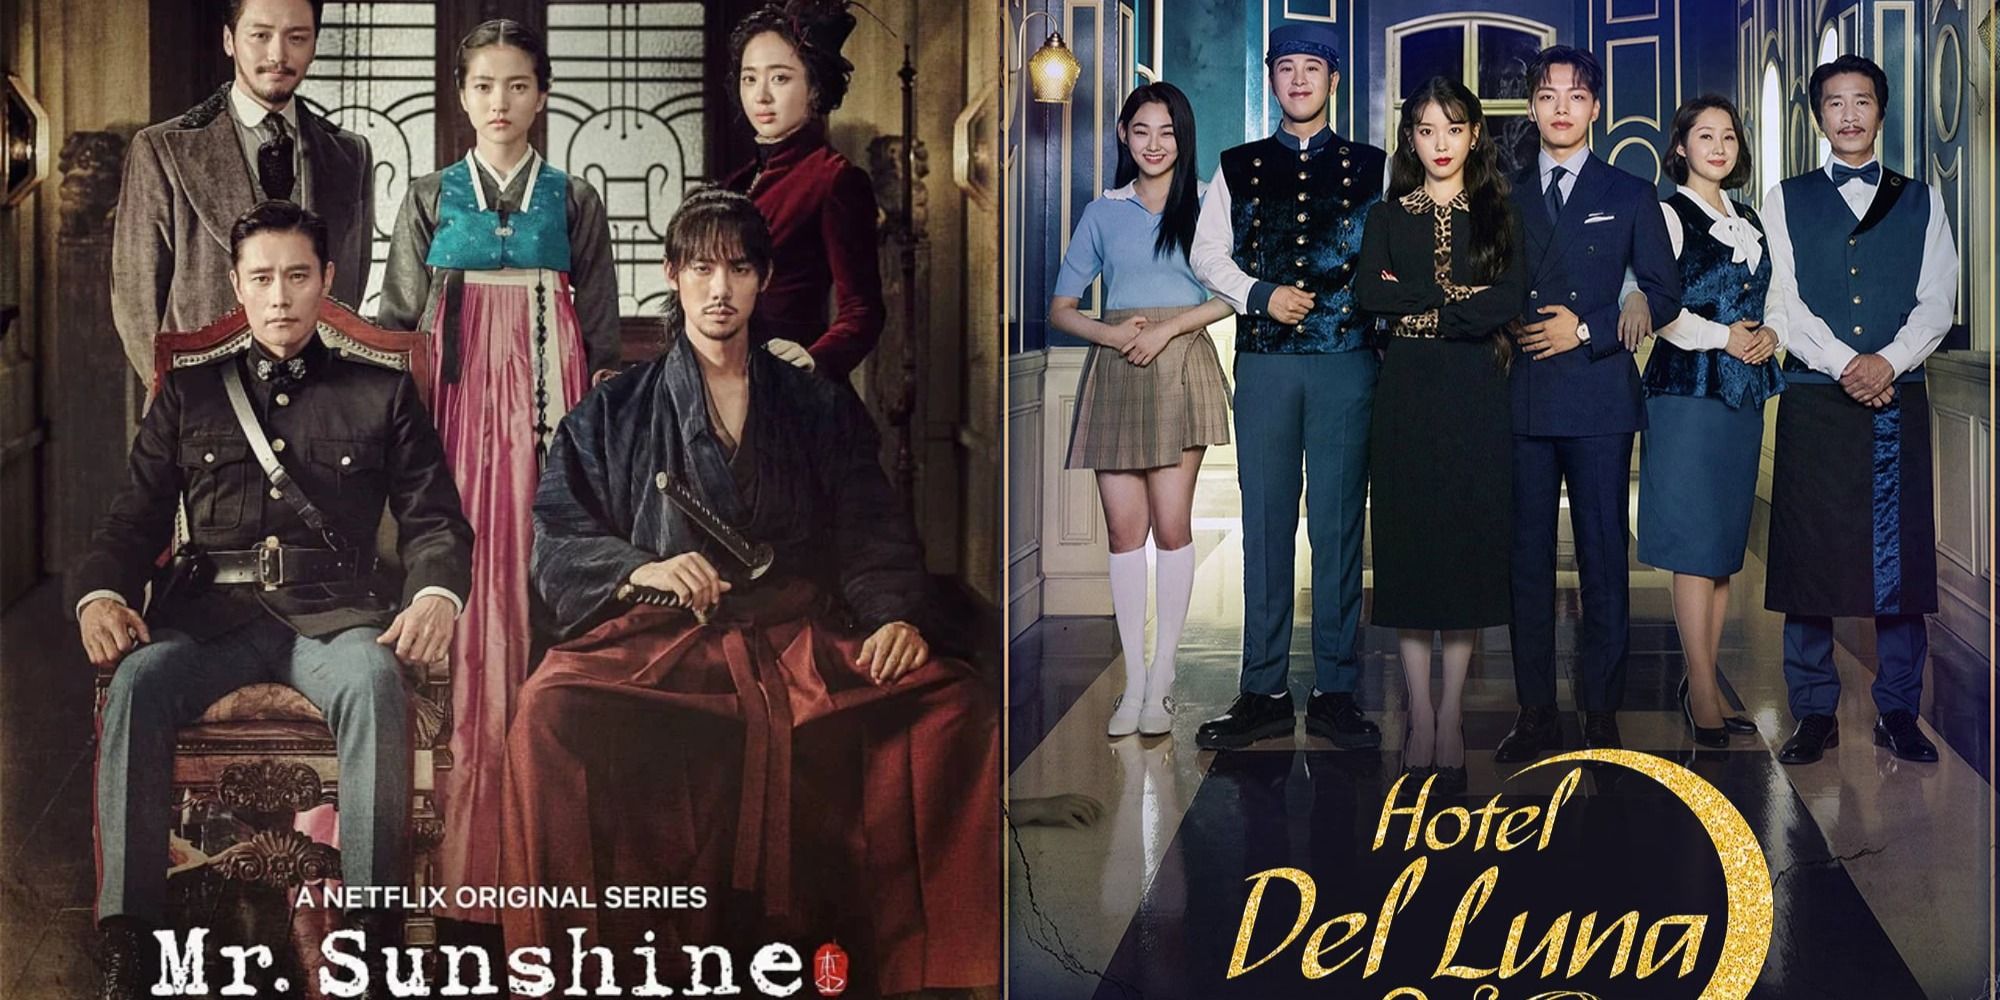 Split image showing characters from the kdramas Mr. Sunshine and Hotel del Luna.